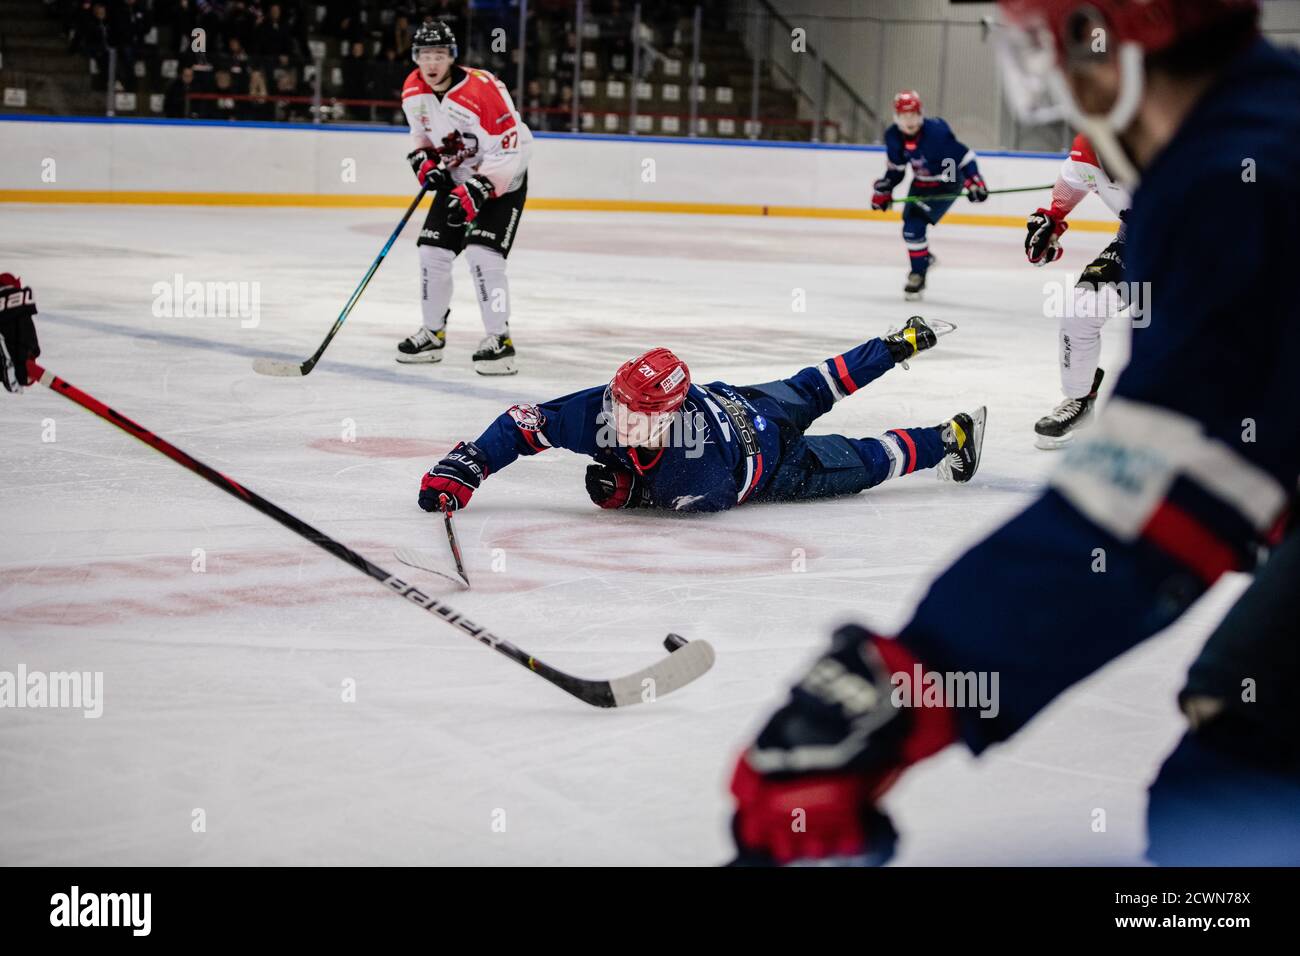 Horsholm, Denmark. 29th Sep, 2020. Andre Pison Staermose (20) of Rungsted Seier Capital seen in the Metalligaen ice hockey match between Capital and Aalborg Pirates at Bitcoin Arena in Horsmolm. (